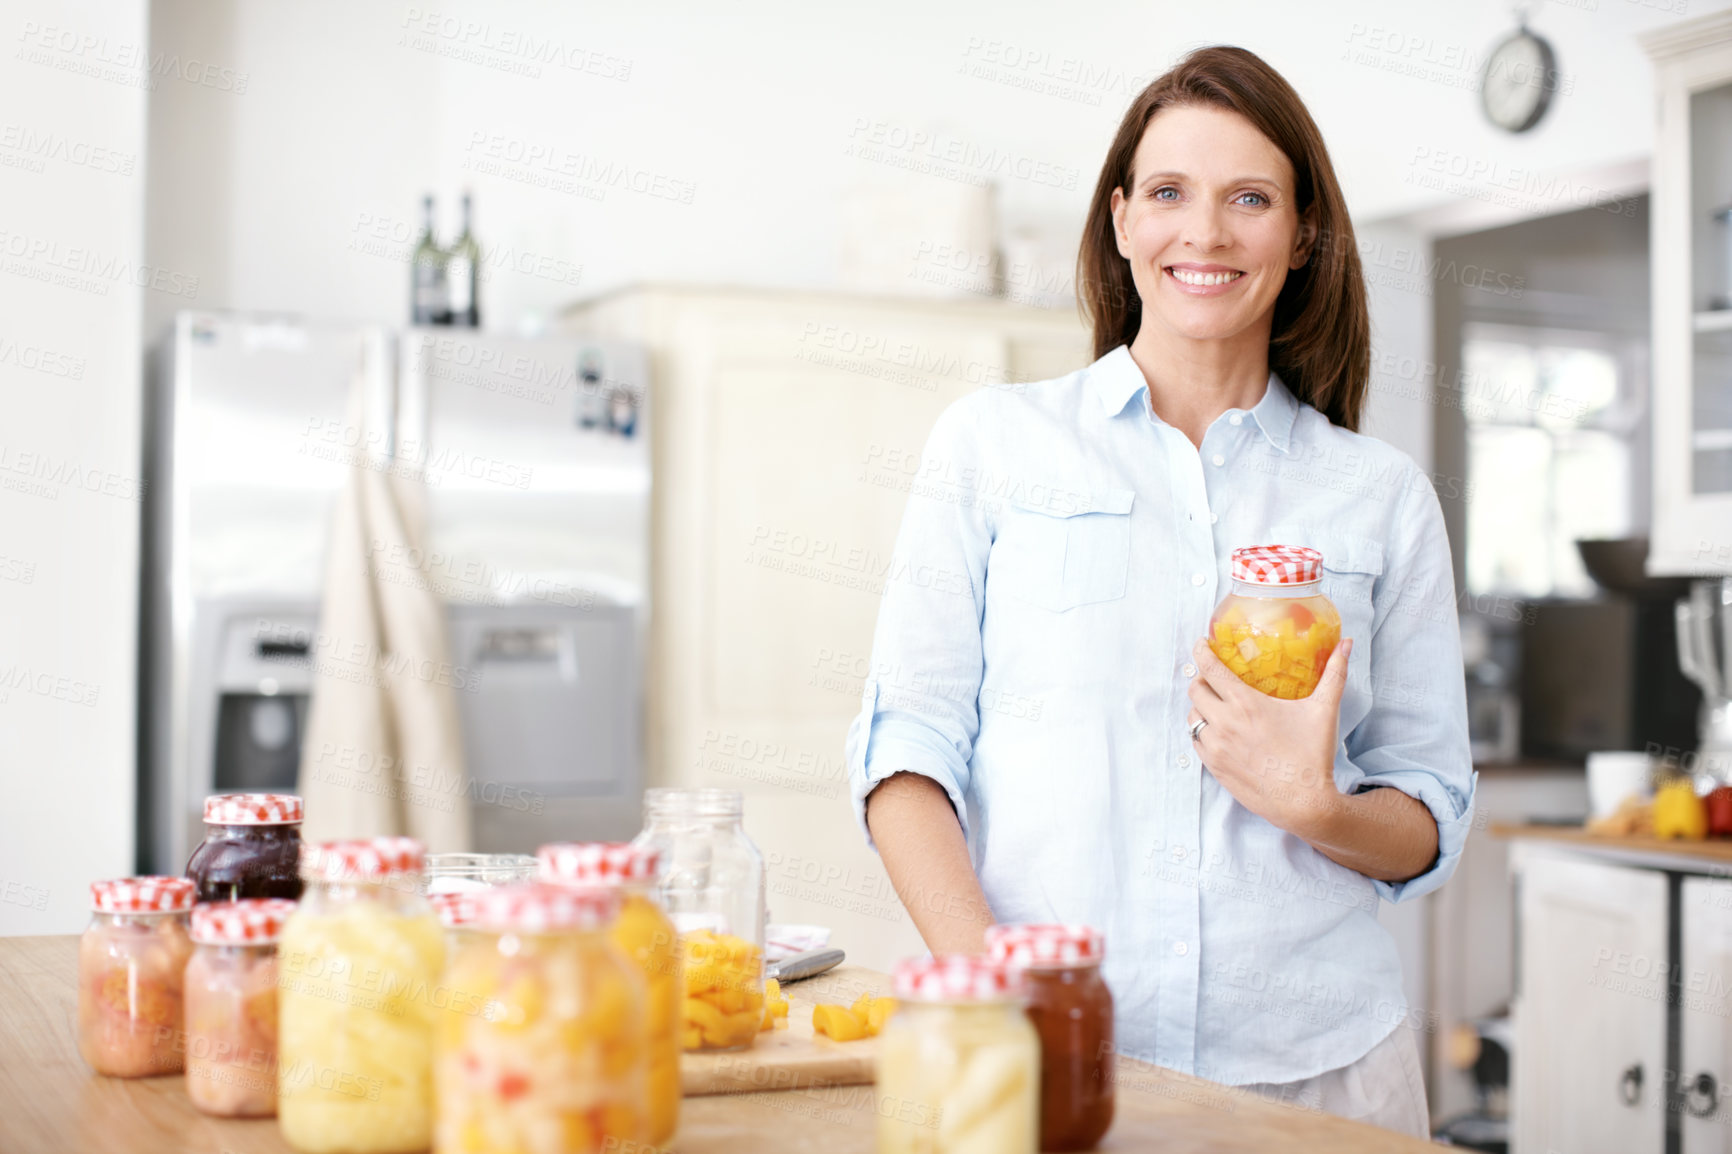 Buy stock photo Portrait of a mature woman standing with a jar in the kitchen